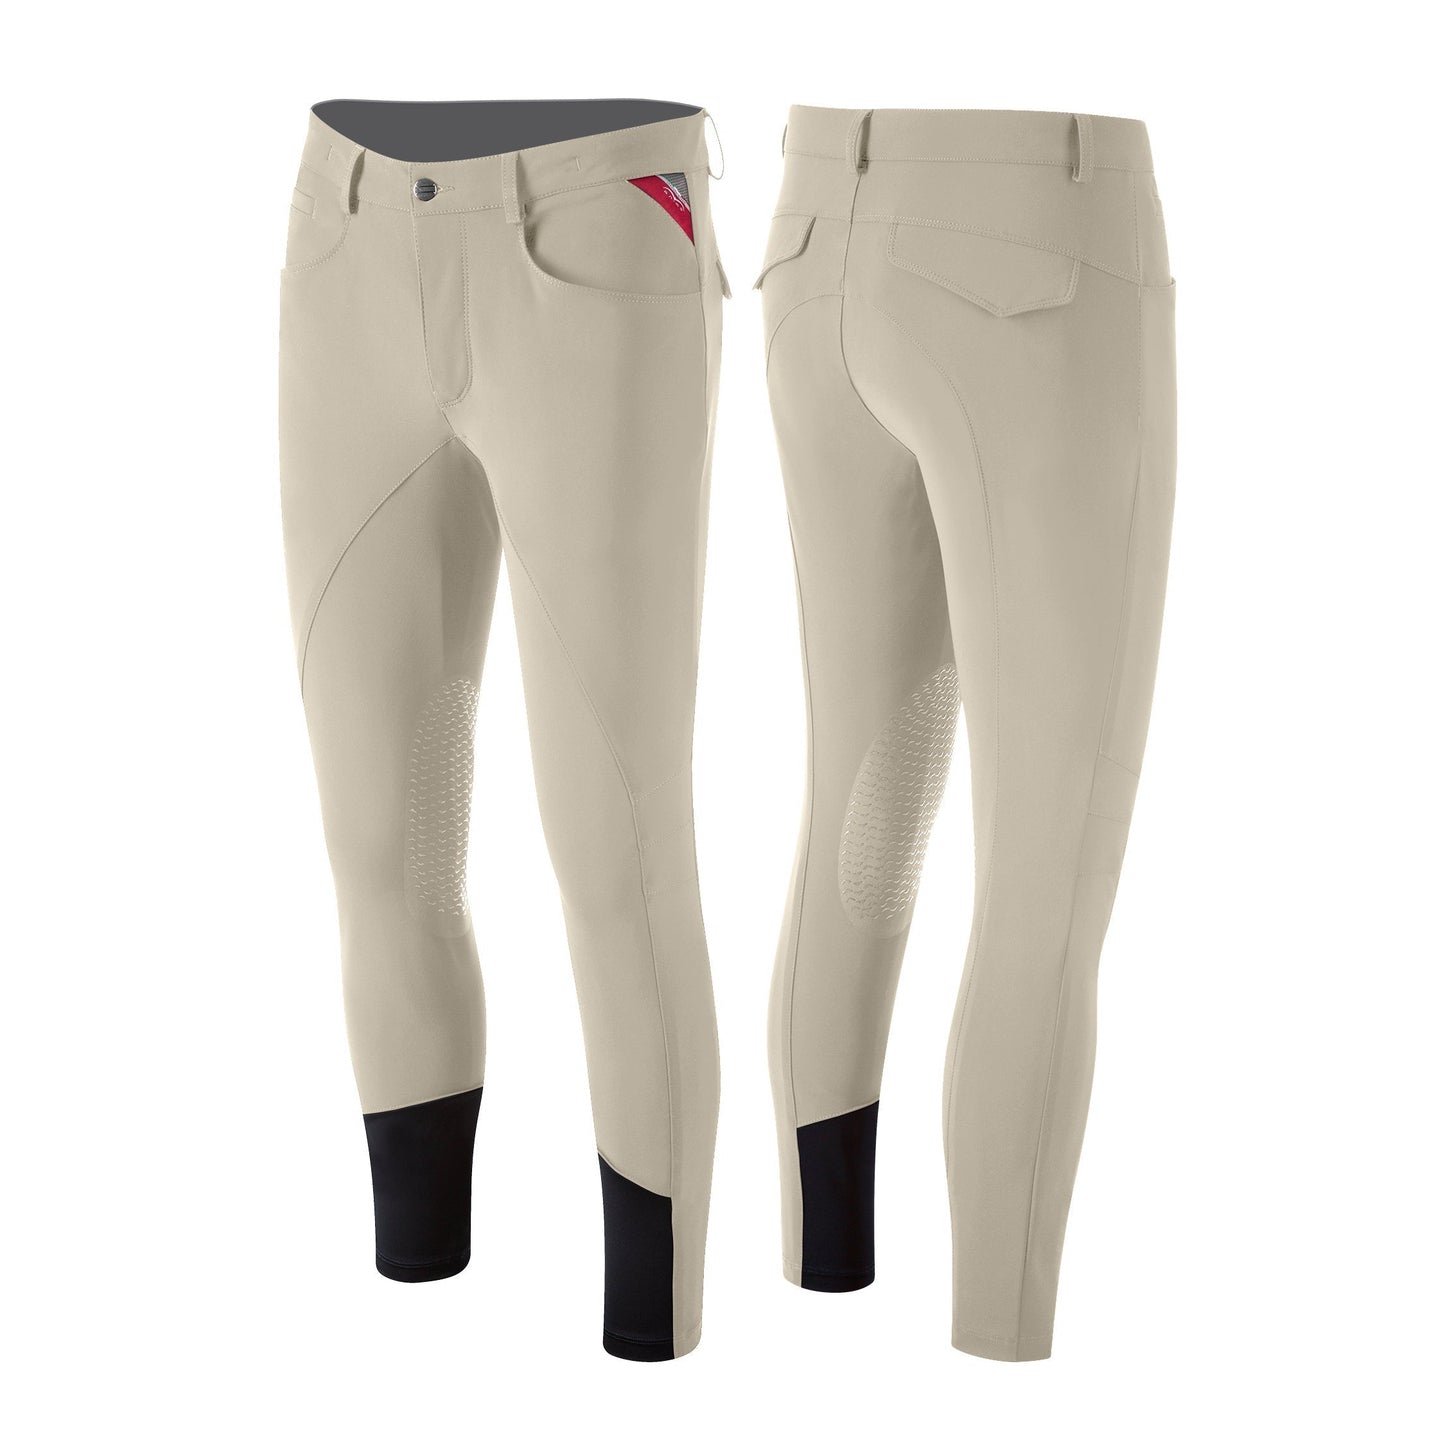 Animo brand beige riding breeches with grip pattern and black details.